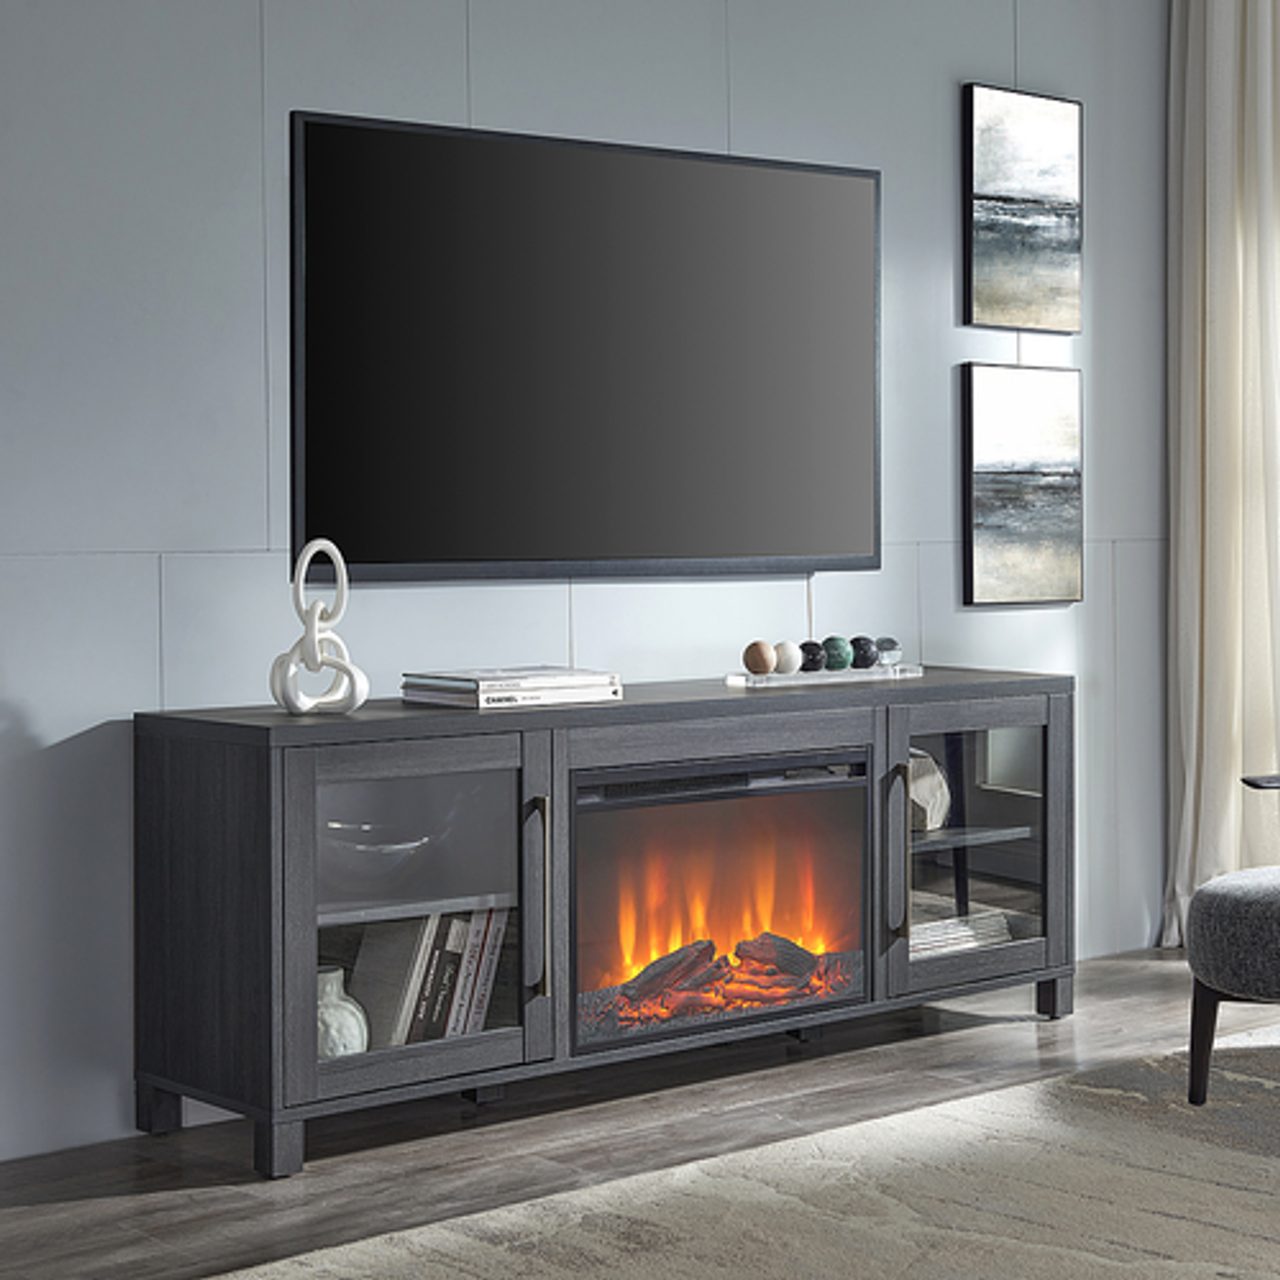 Camden&Wells - Quincy Log Fireplace TV Stand for TVs up to 80" - Charcoal Gray